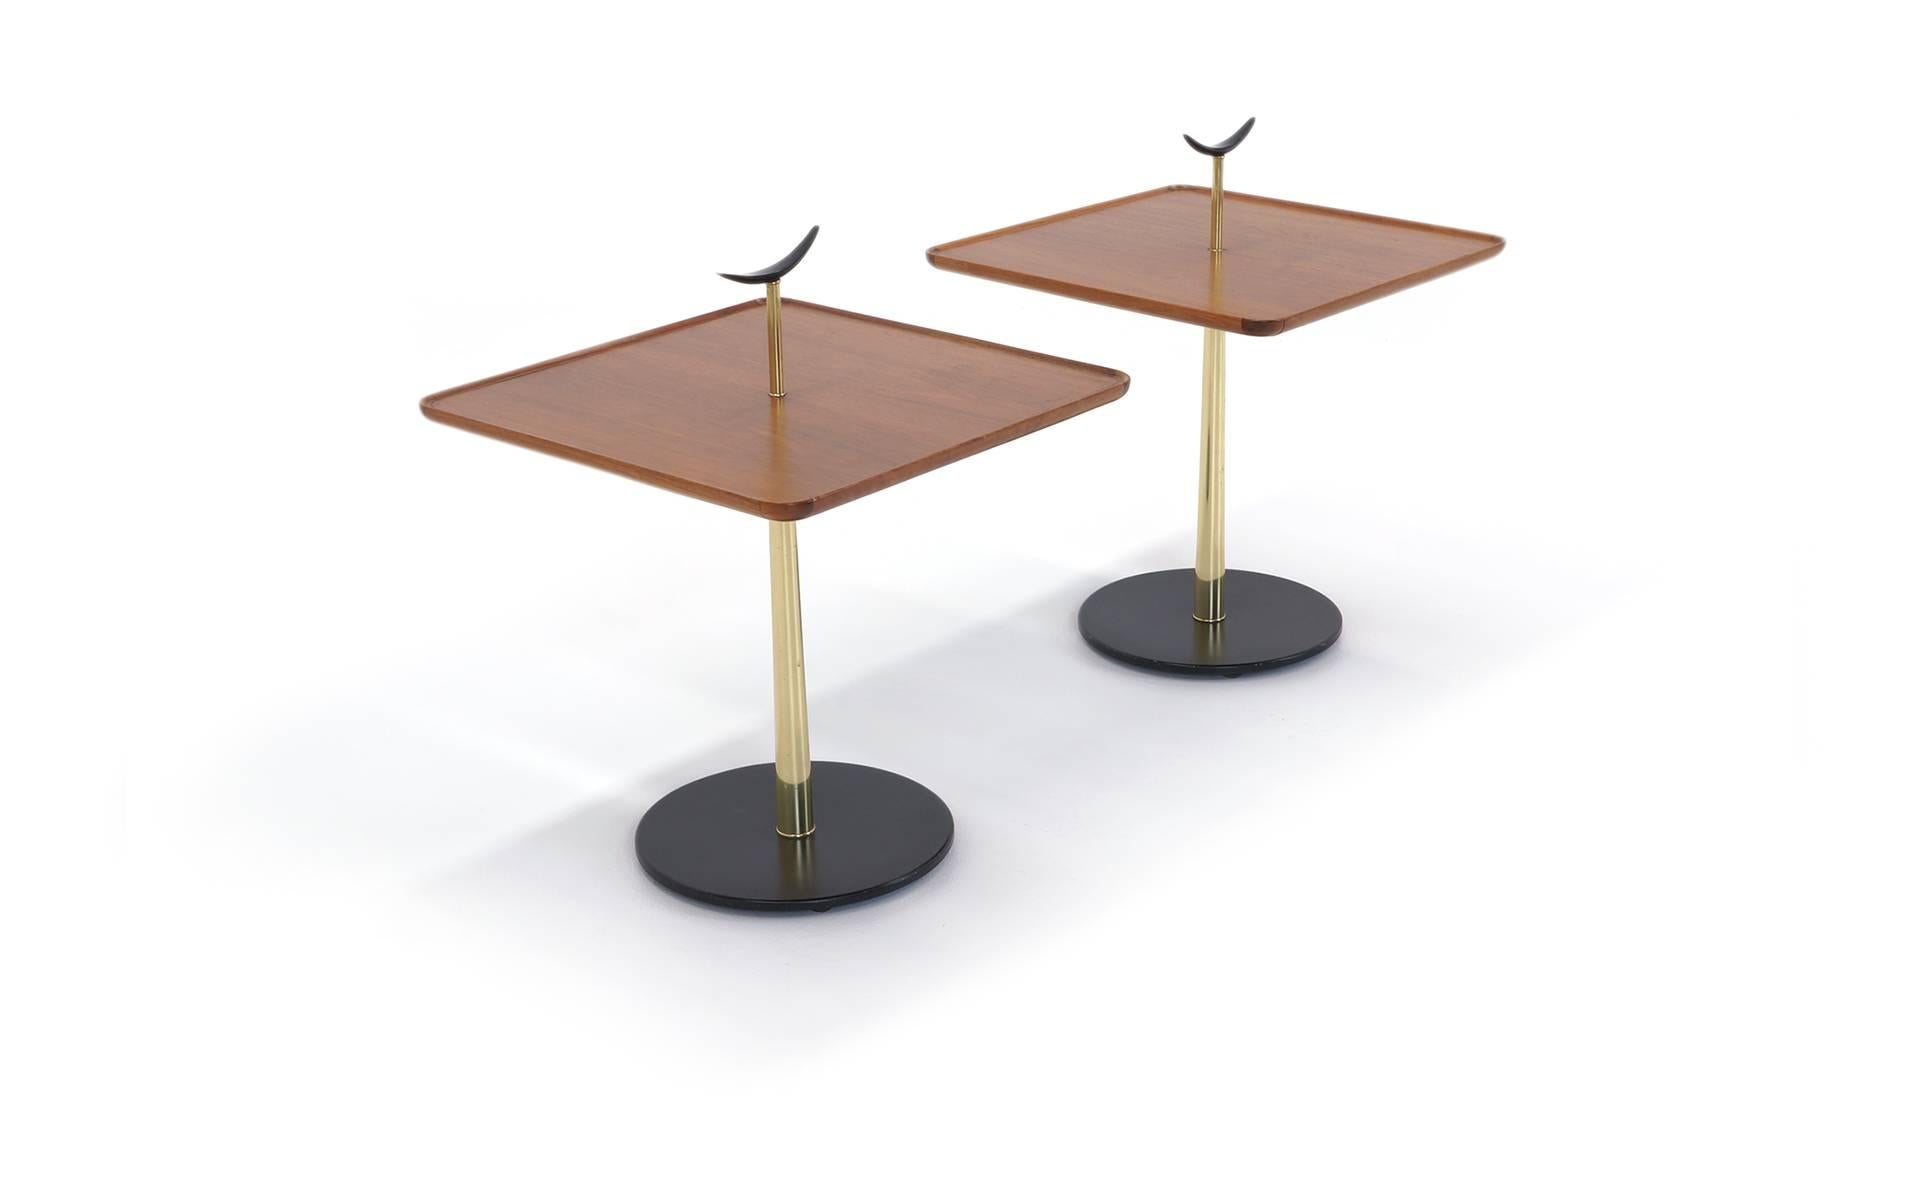 Extremely rare matched pair of end tables designed by Milo Baughman for Arch Gordon. Excellent original condition.

Table top height: 18.25 in.
Hheight including centerpiece: 22.88 in.